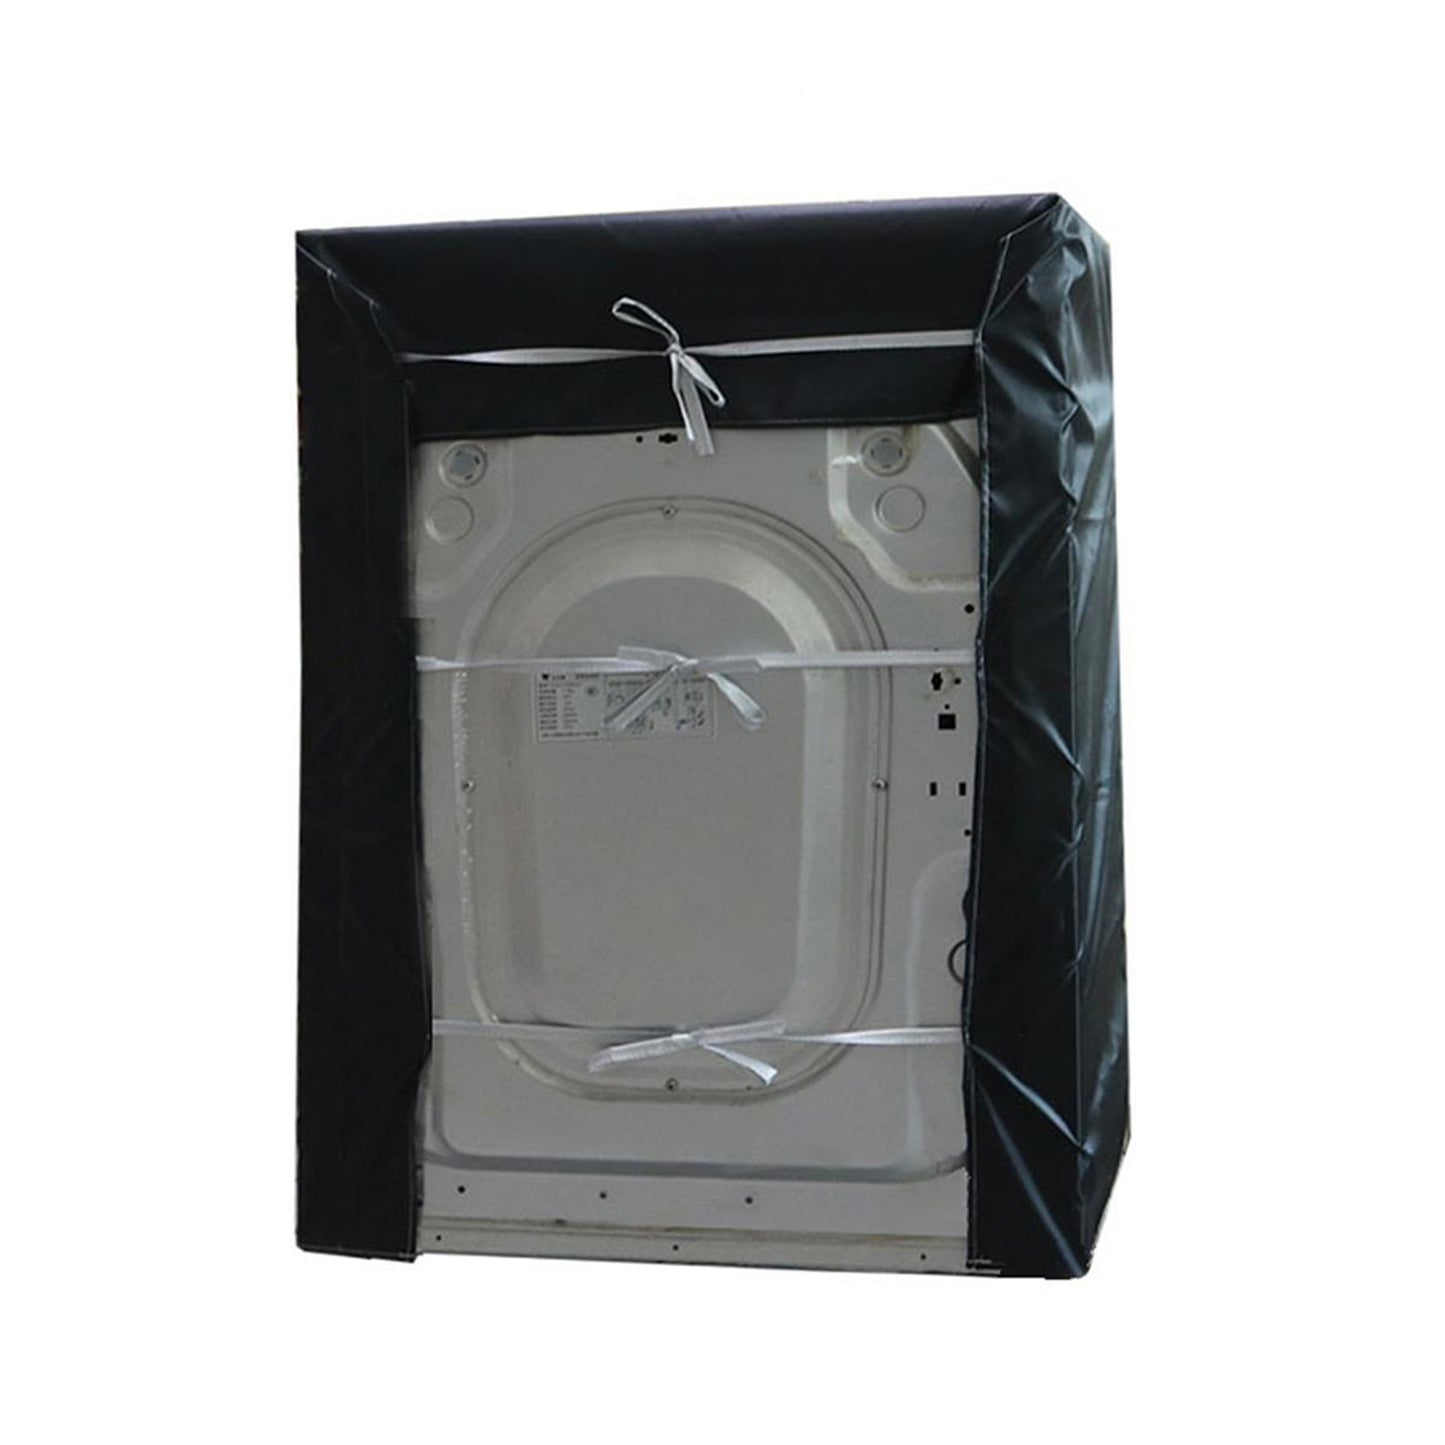 Waterproof Washing Machine Top Dustproof Cover Protect Front Load Washer Dryer